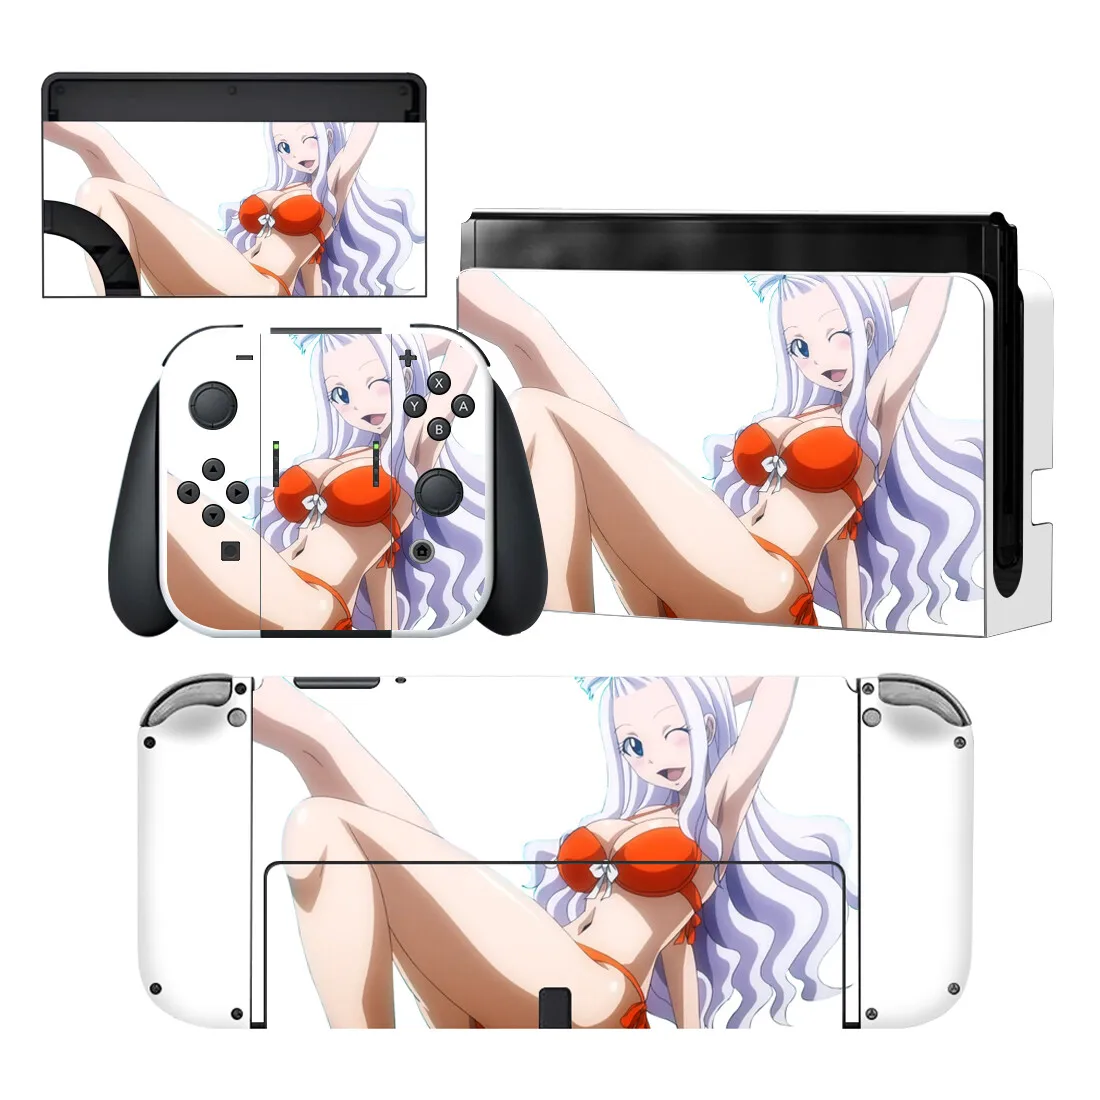 

Anime Cute Girl Nintendoswitch Skin Cover Sticker Decal for Nintendo Switch NS OLED Console Joy-con Controller Dock Vinyl